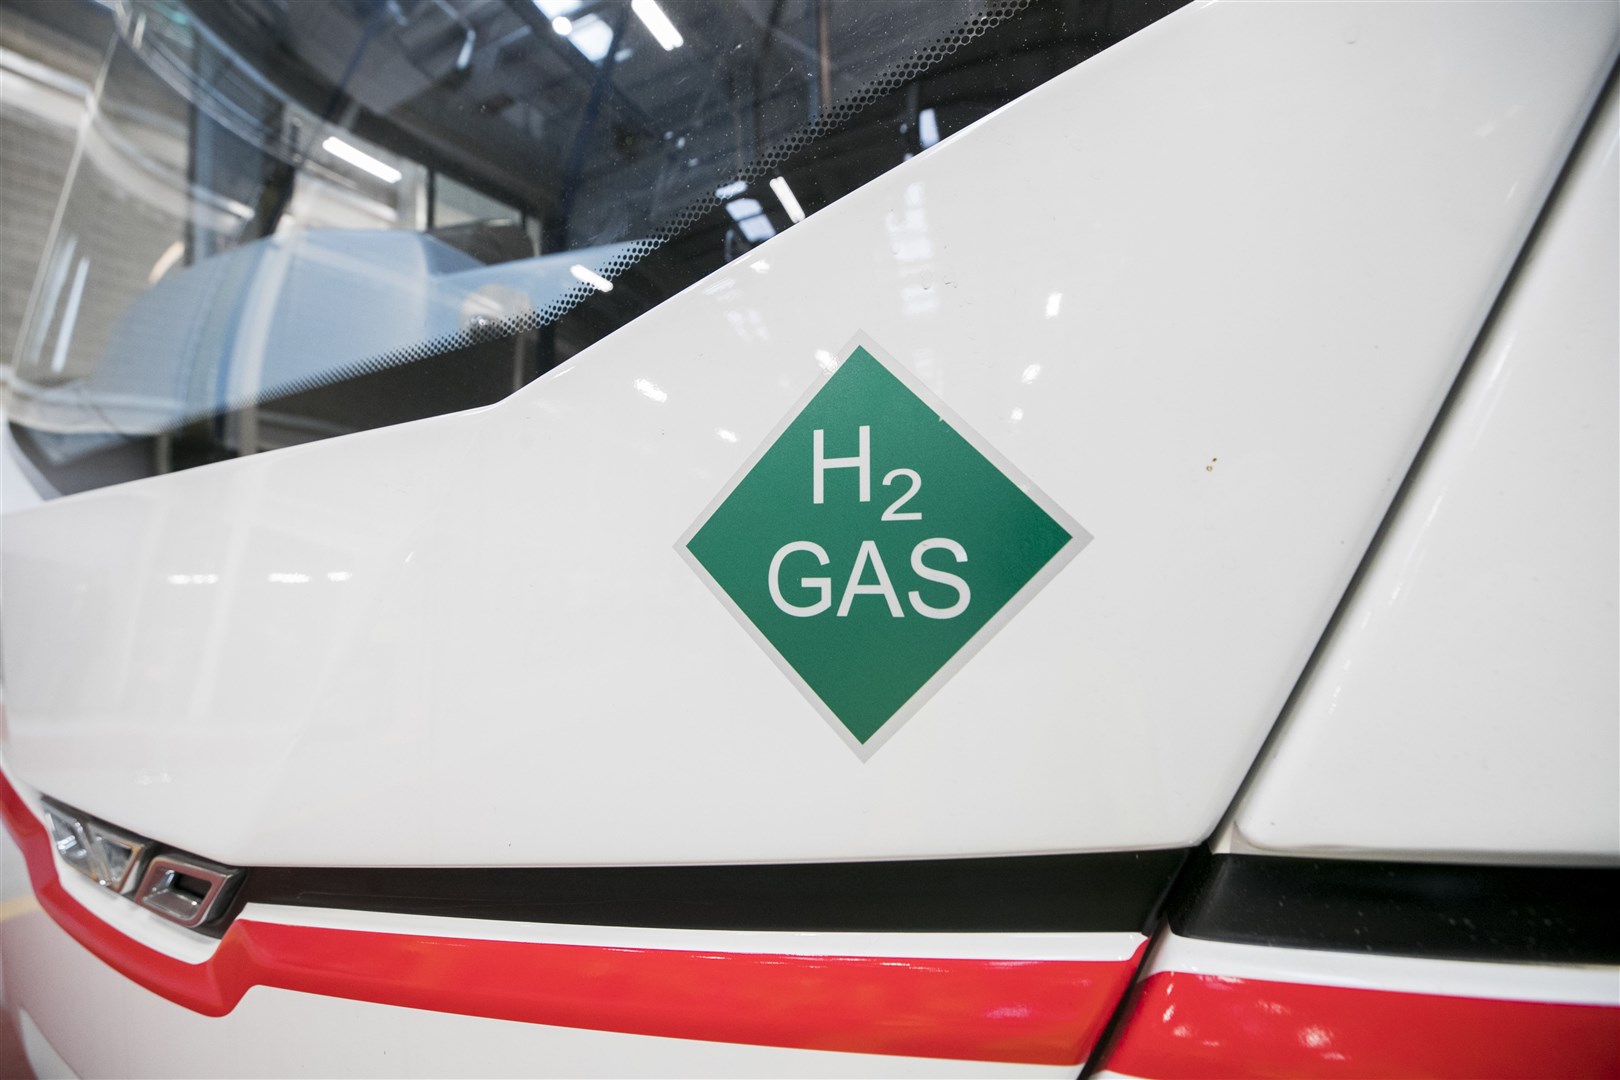 Hydrogen should be used for industry instead of homes, experts have said (Liam McBurney/PA)